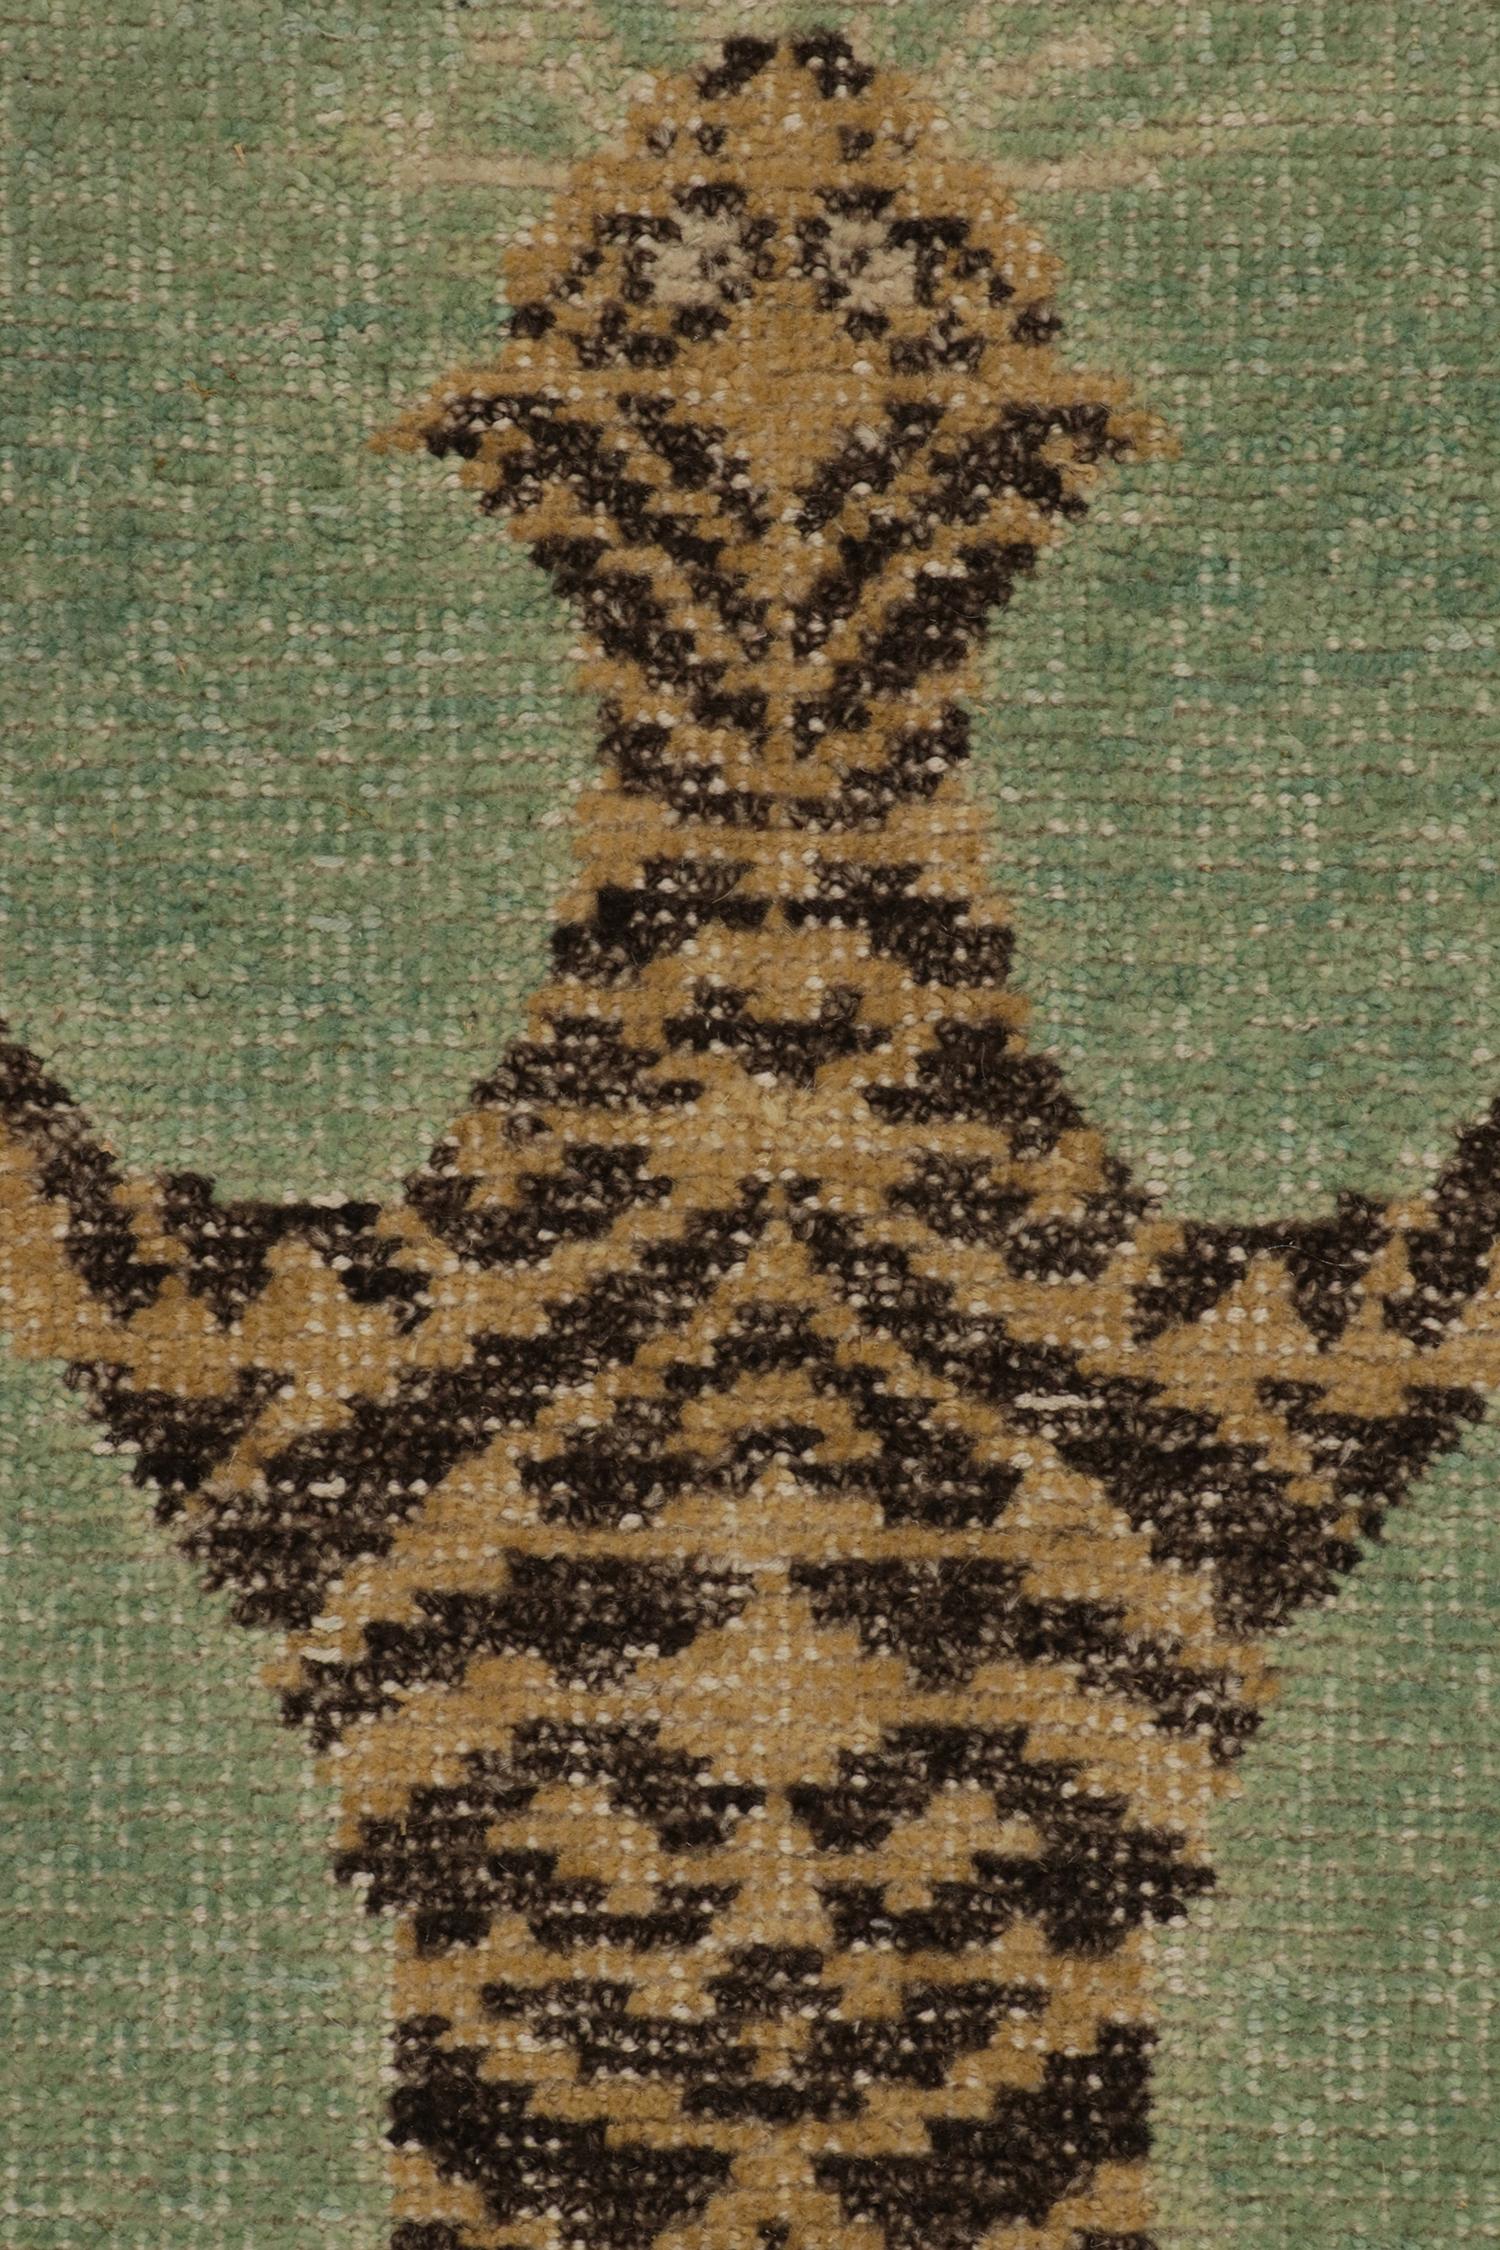 Hand-Knotted Rug & Kilim’s Distressed Tiger Skin Style Rug in Green, Beige & Black Pictorial